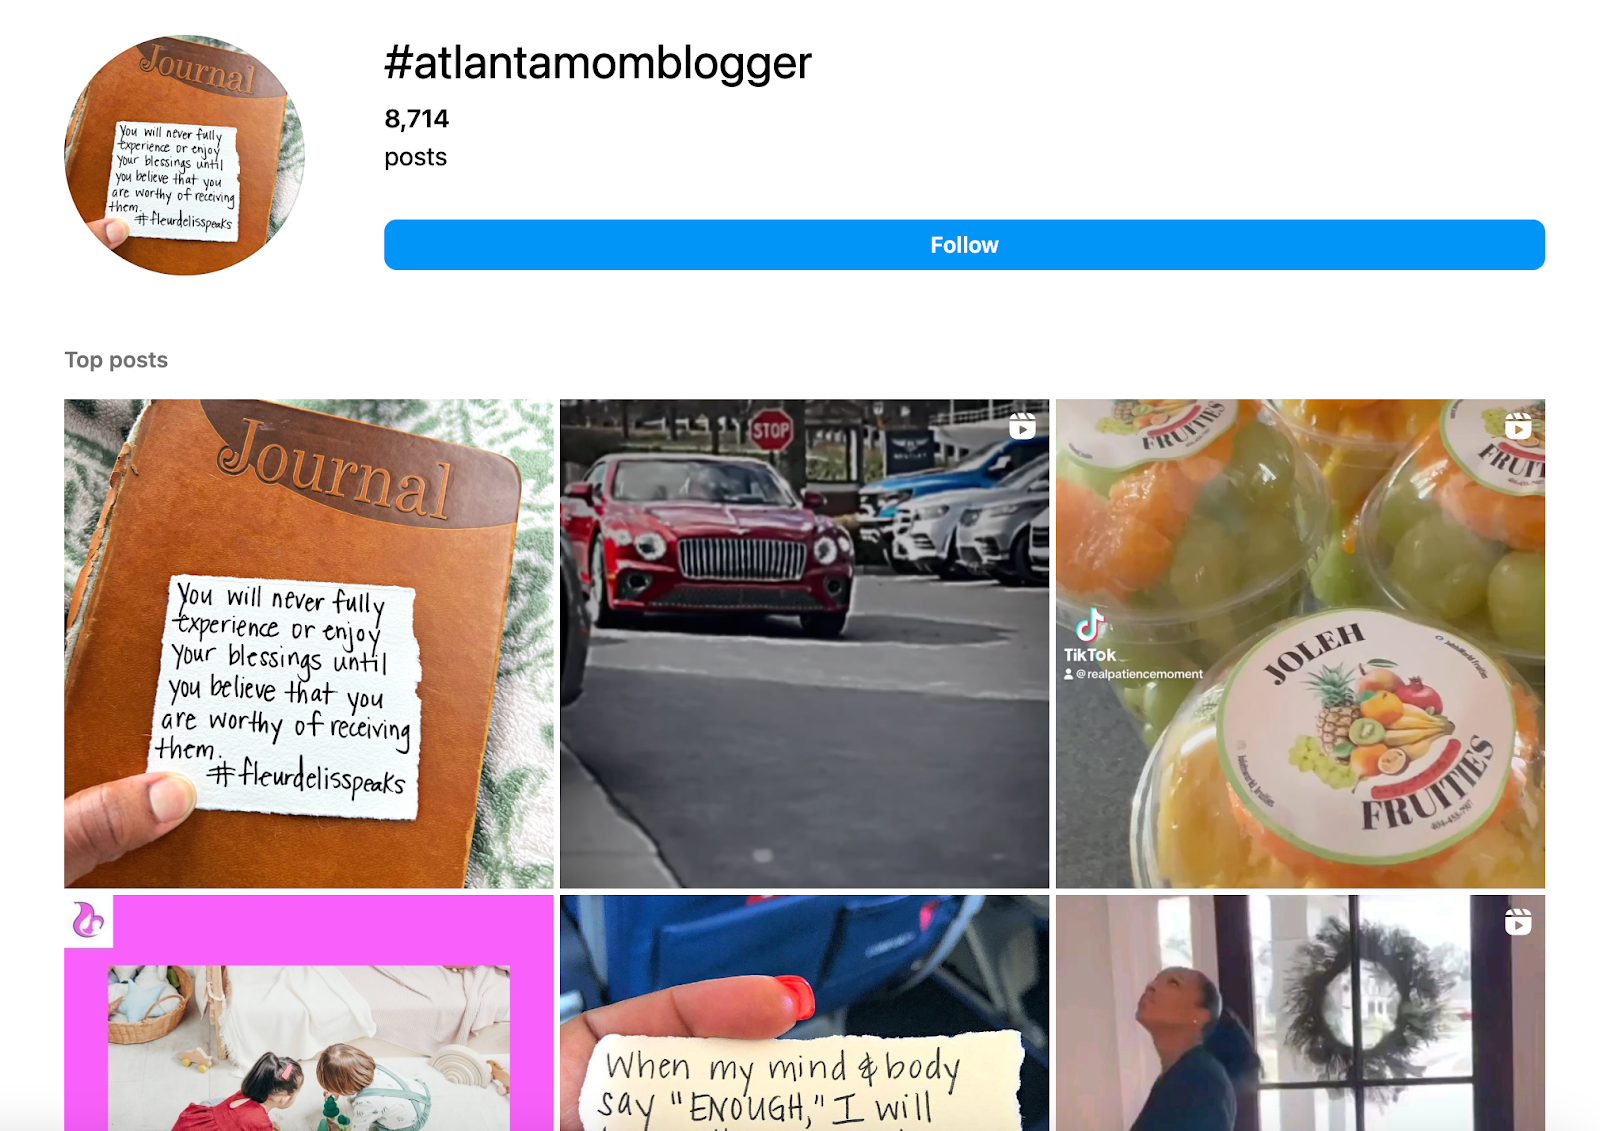 Search results for the hashtag #atlantamomblogger on Instagram